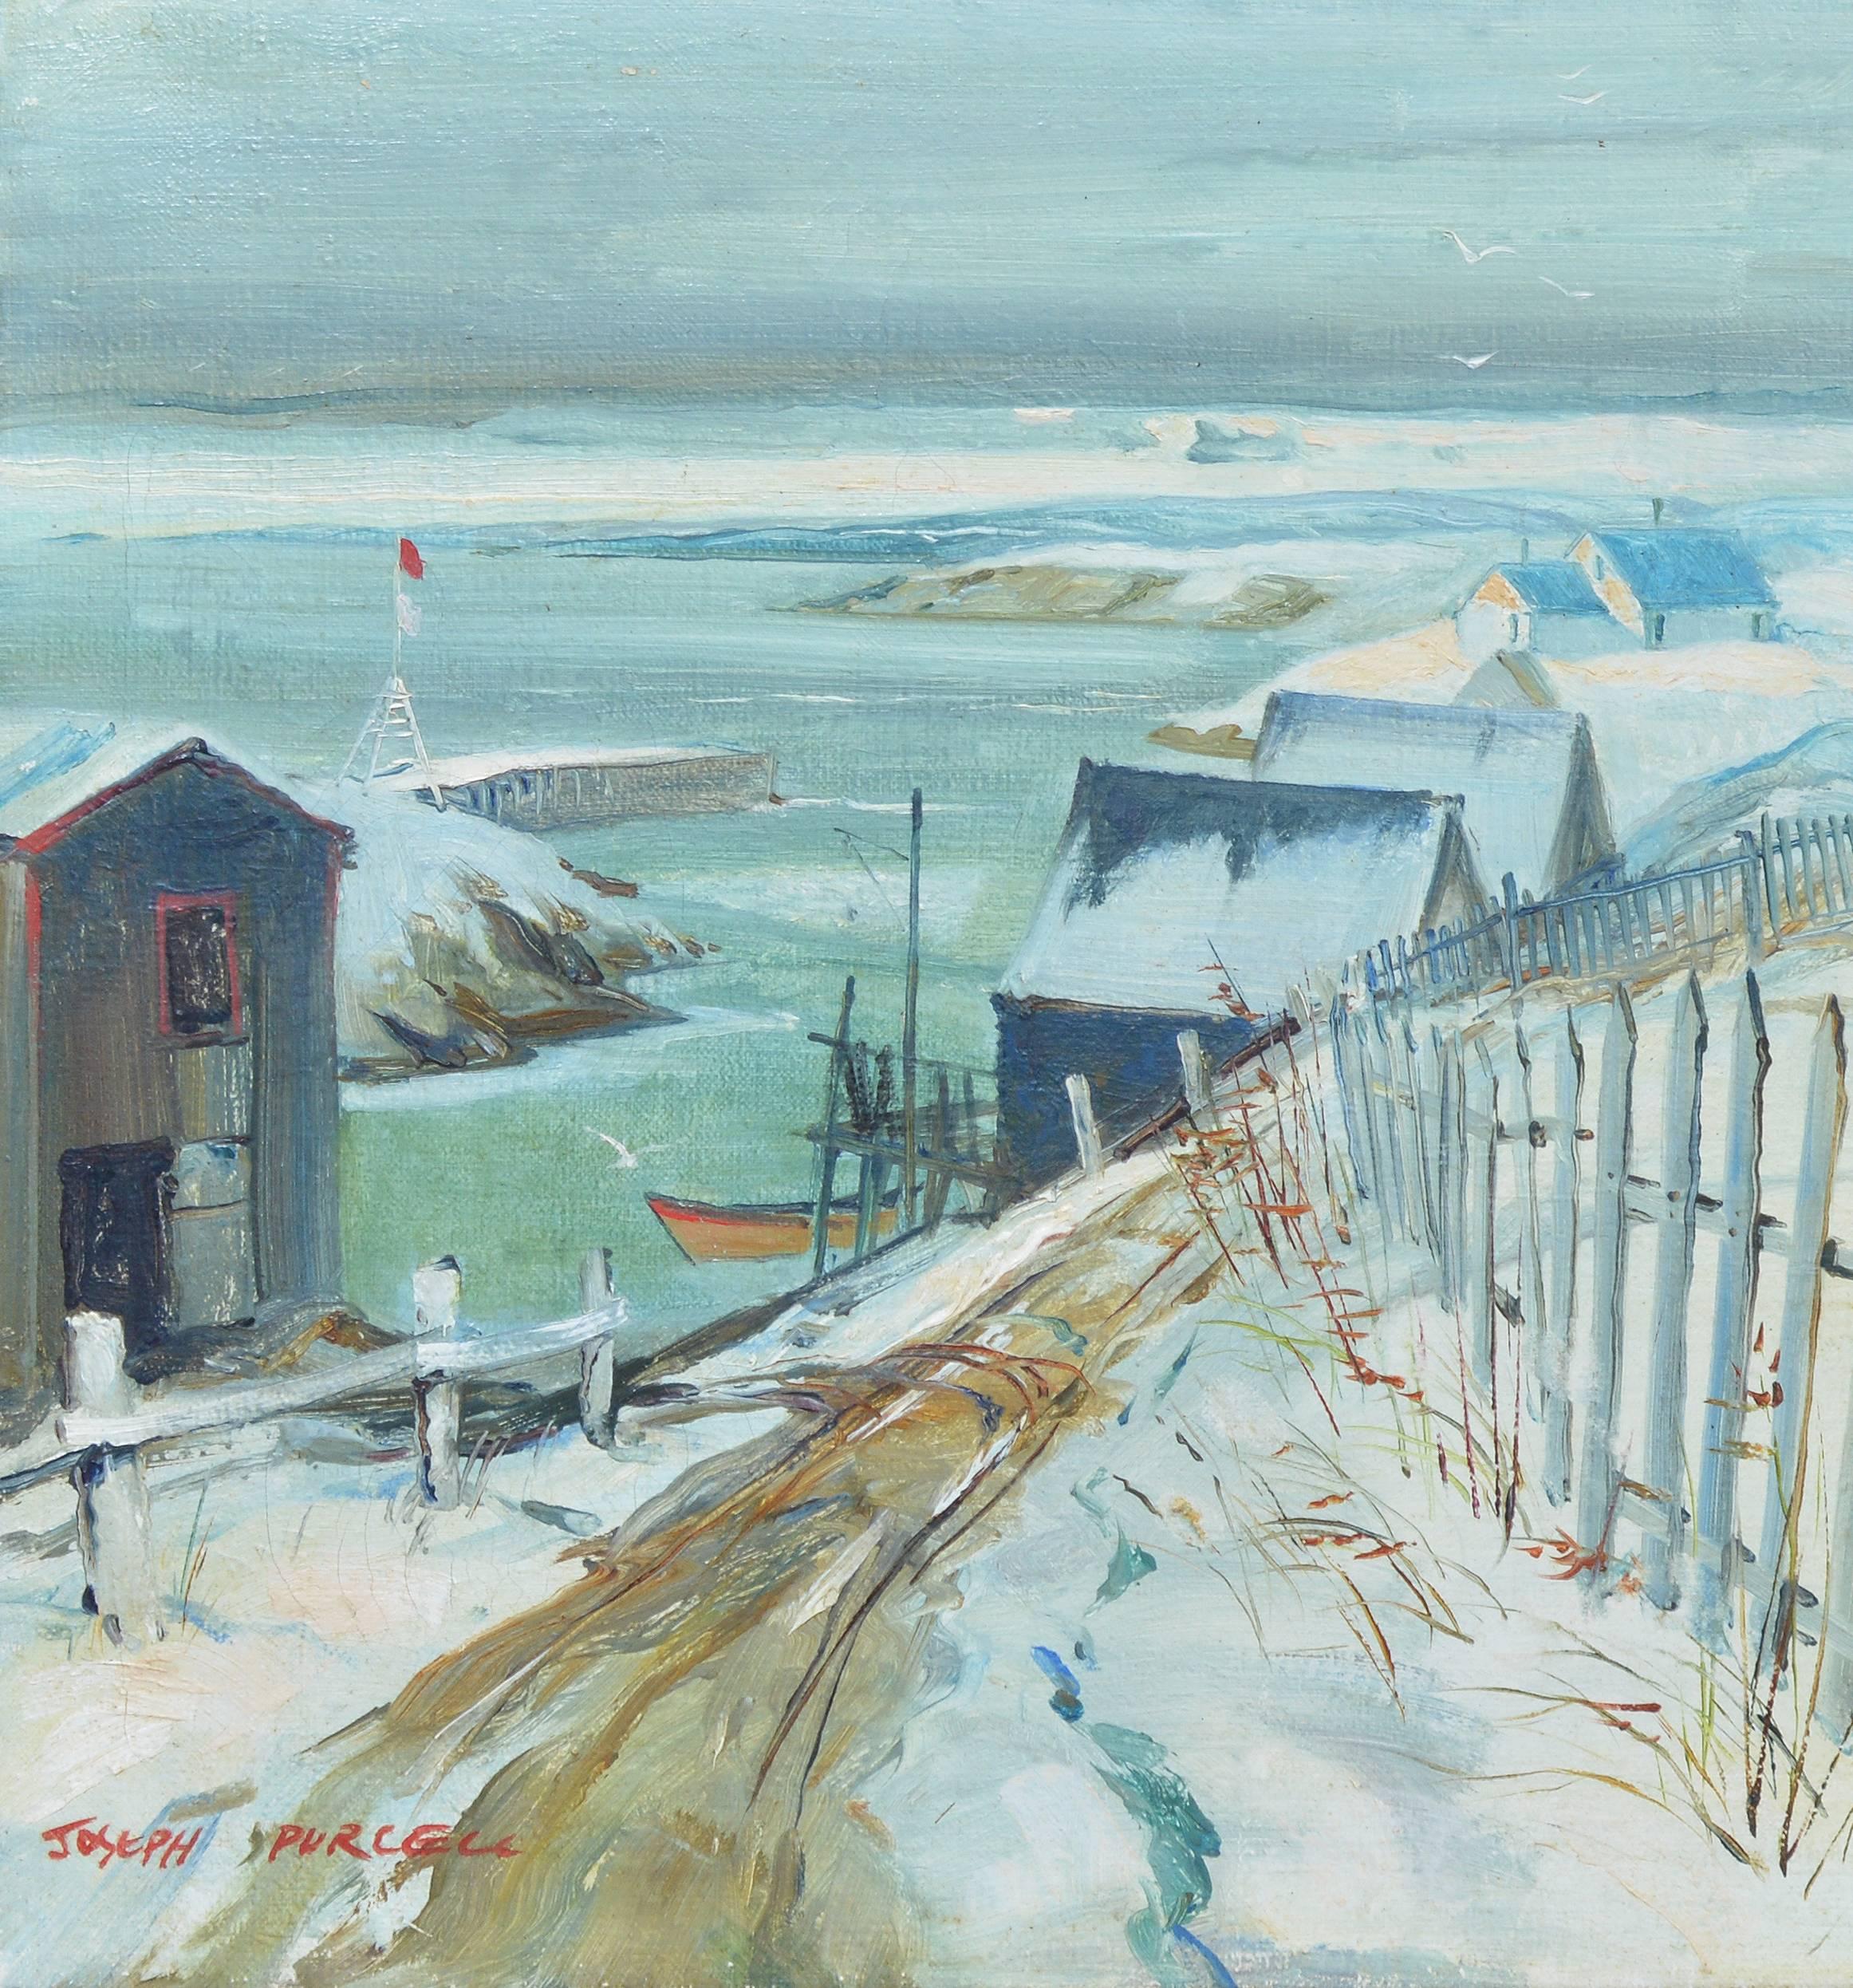 Nova Scotia Winter - Gray Landscape Painting by Joseph Purcell